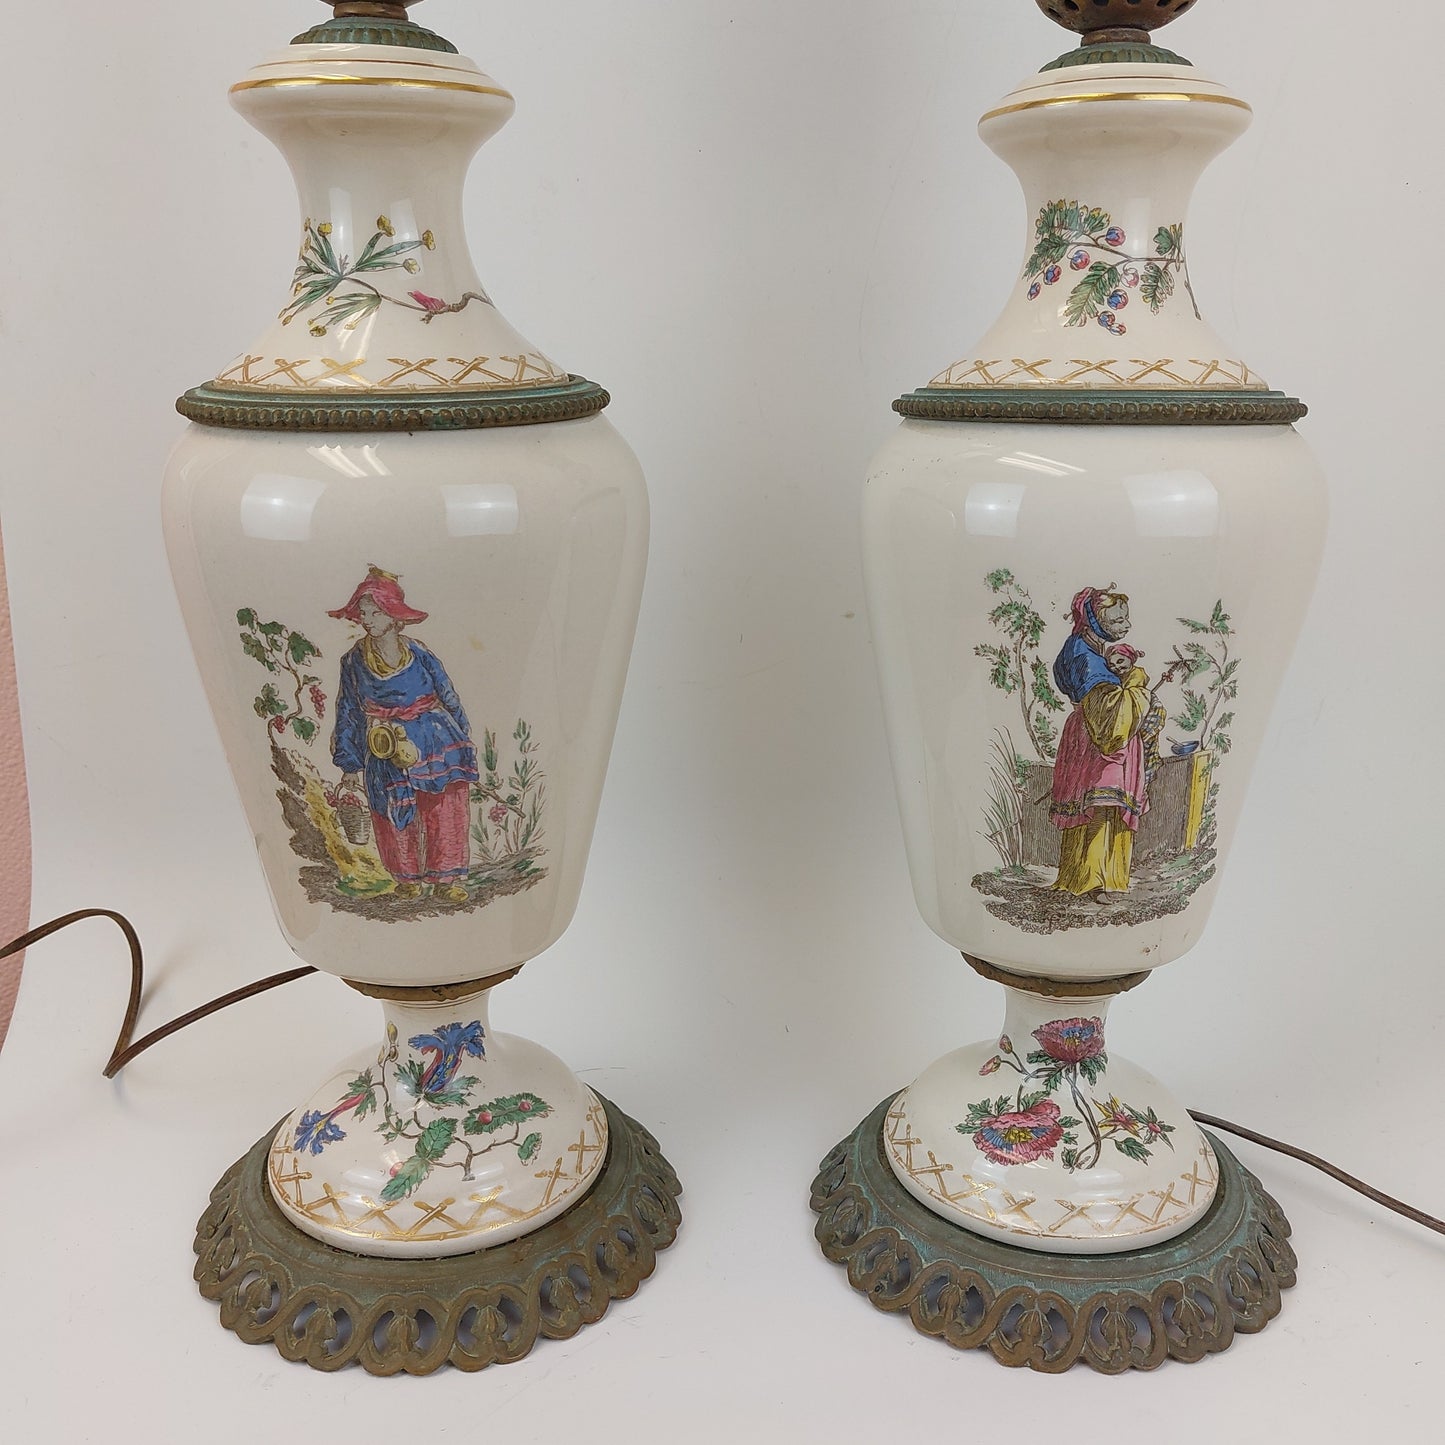 Vintage Pair of Paul Hanson Brass and Porcelain Hand Painted Lamps 519-A